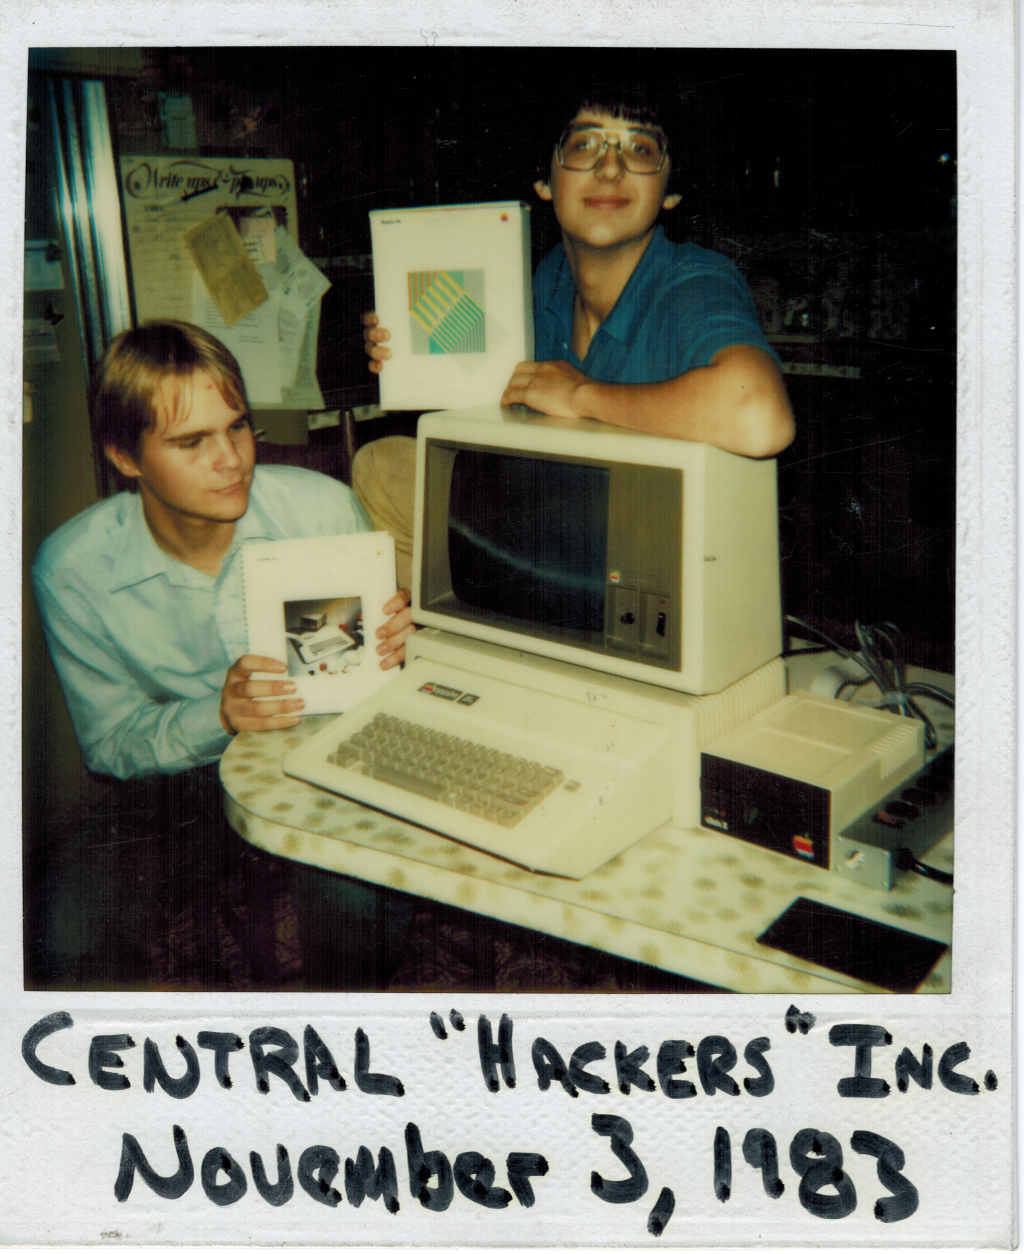 Central_Hackers_Inc-03-NOV-1983-1024x1254.png